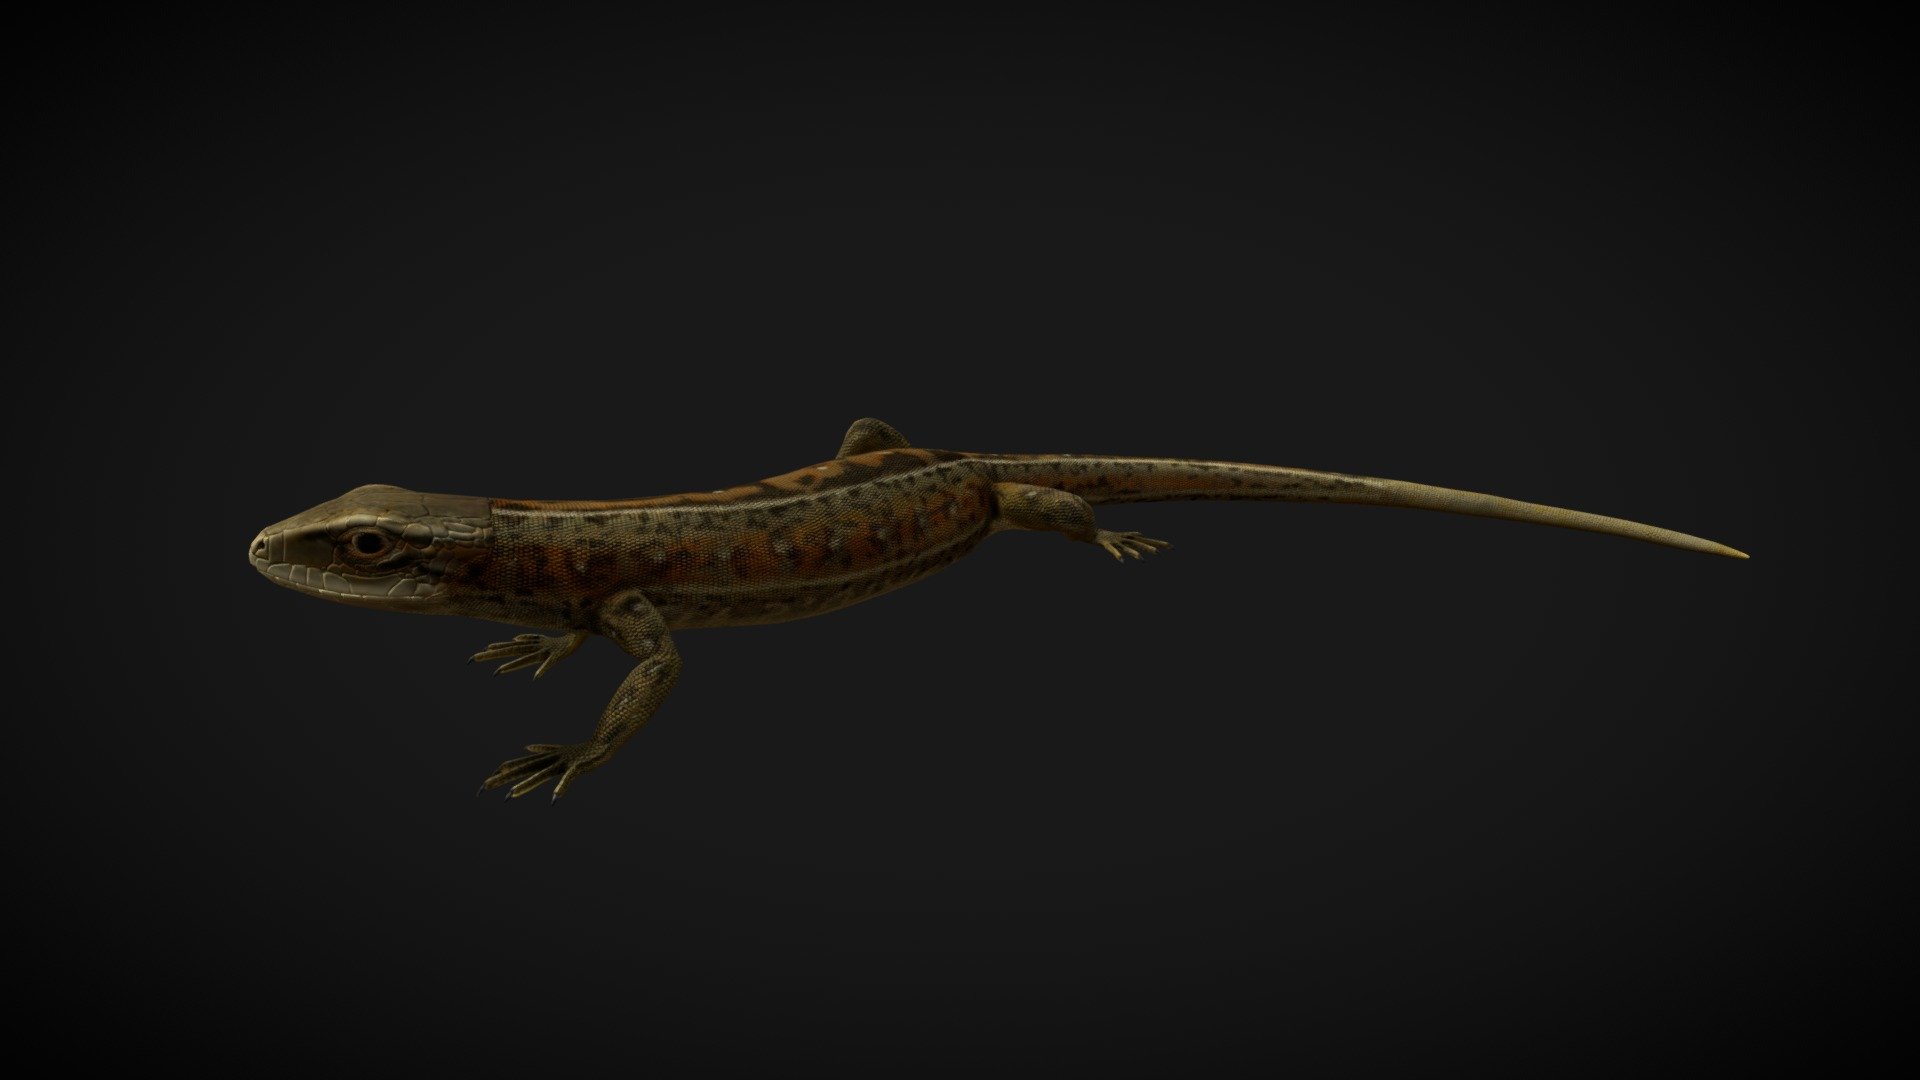 Lizard Lacerta Vivipara high quality Lowpoly model. Fully detailed, textured model is ready for Virtual Reality (VR),
Augmented Reality (AR), games and other real-time apps. It was created with 3ds Max(.max format) and rigged in 
CUT Rigging system. That pack includes two animation scenes(&ldquo;walking